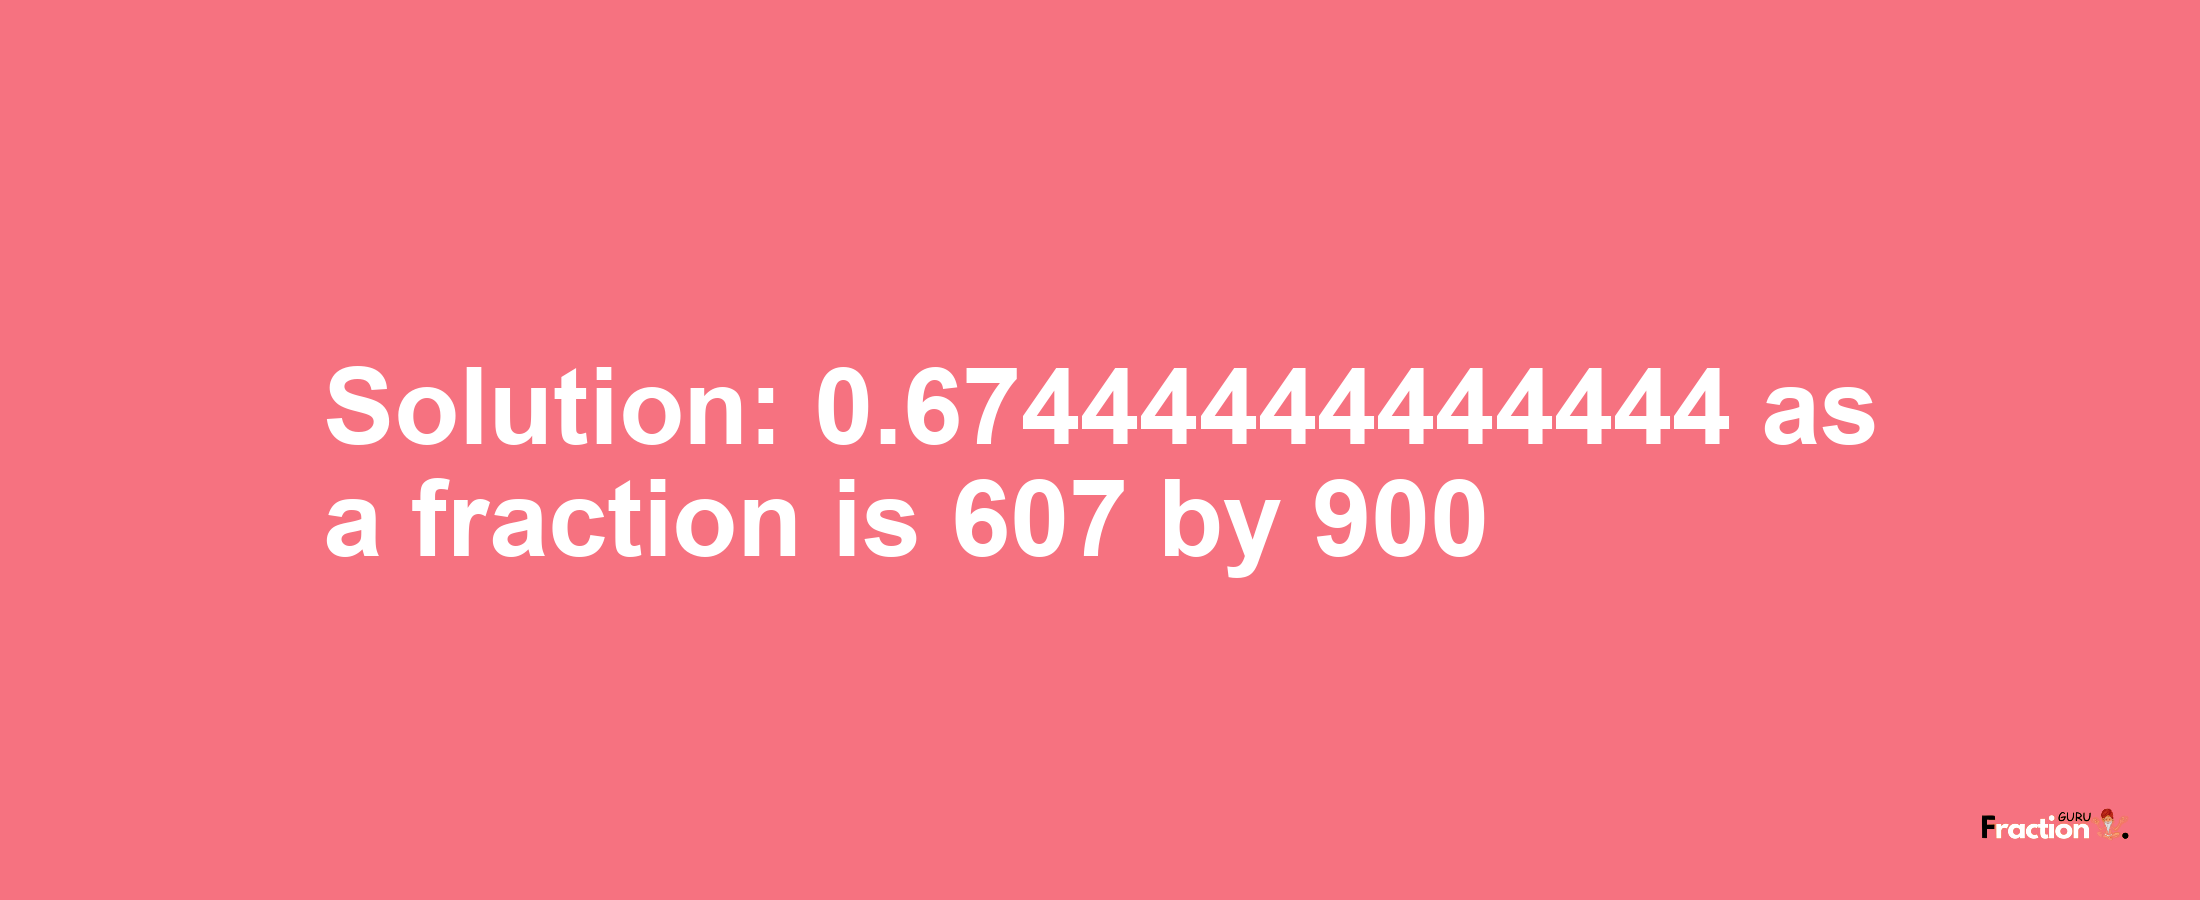 Solution:0.67444444444444 as a fraction is 607/900